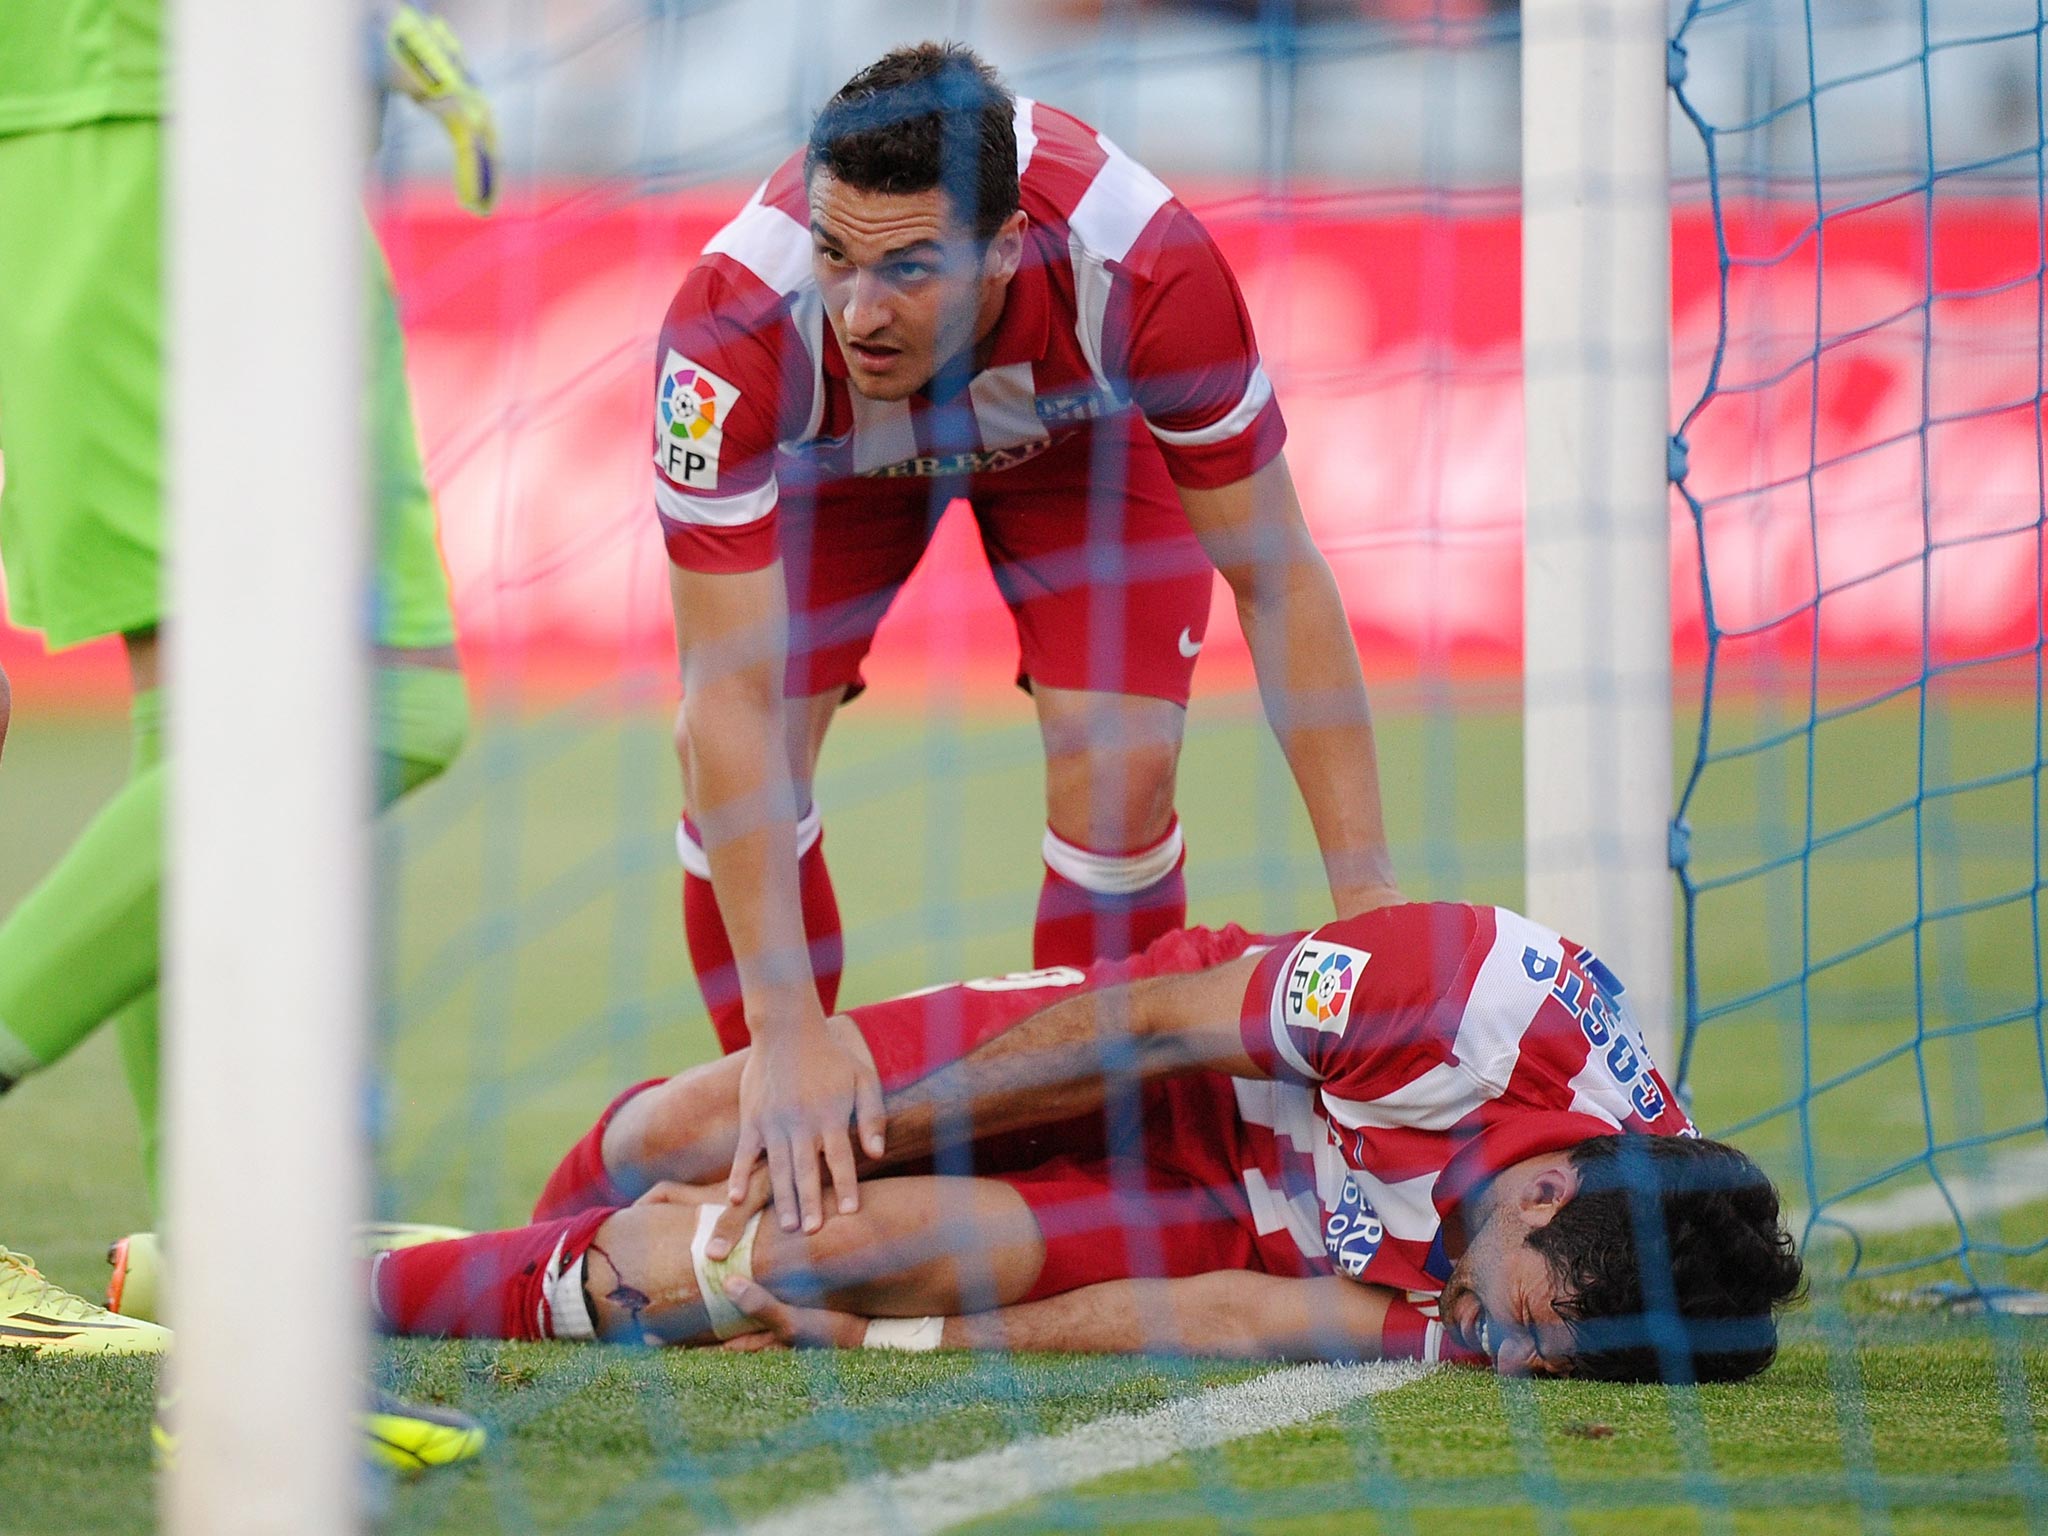 Diego Costa lies in pain after hitting the post when scoring in Atletico Madrid's 2-0 win over Getafe